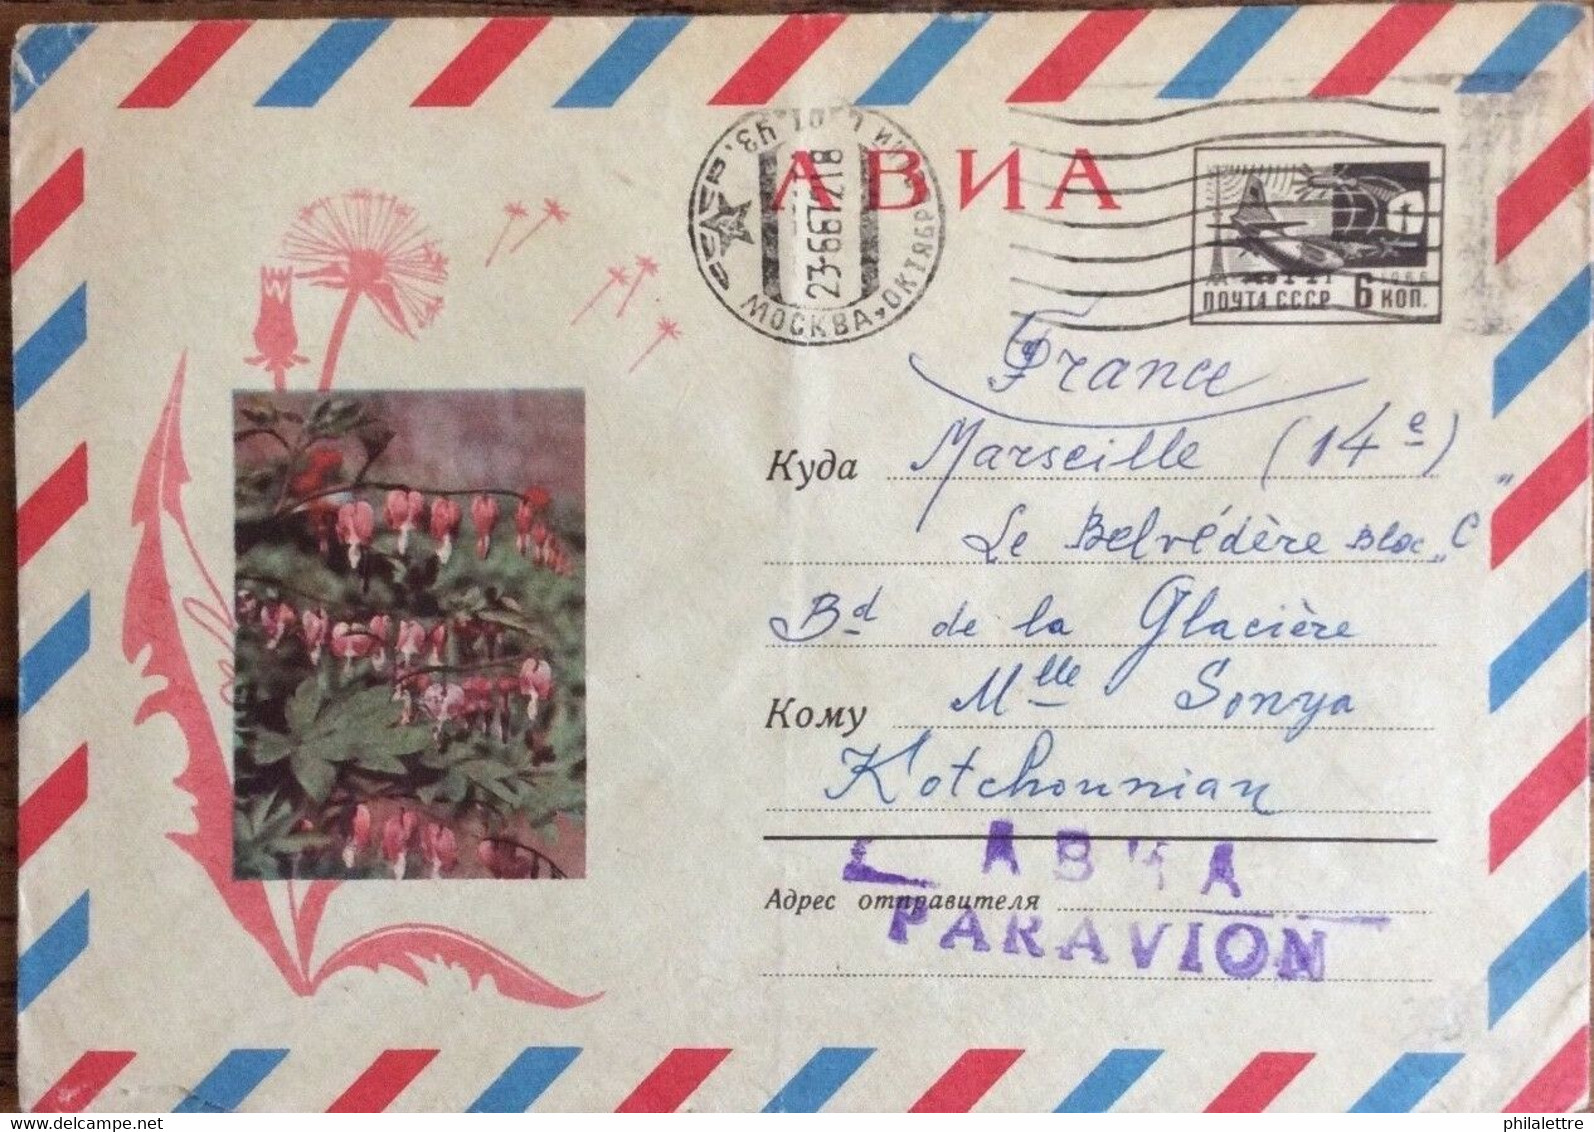 URSS Soviet Union -Air Mail Postal Cover Moscow Oktyabrskaya To France - 1960-69